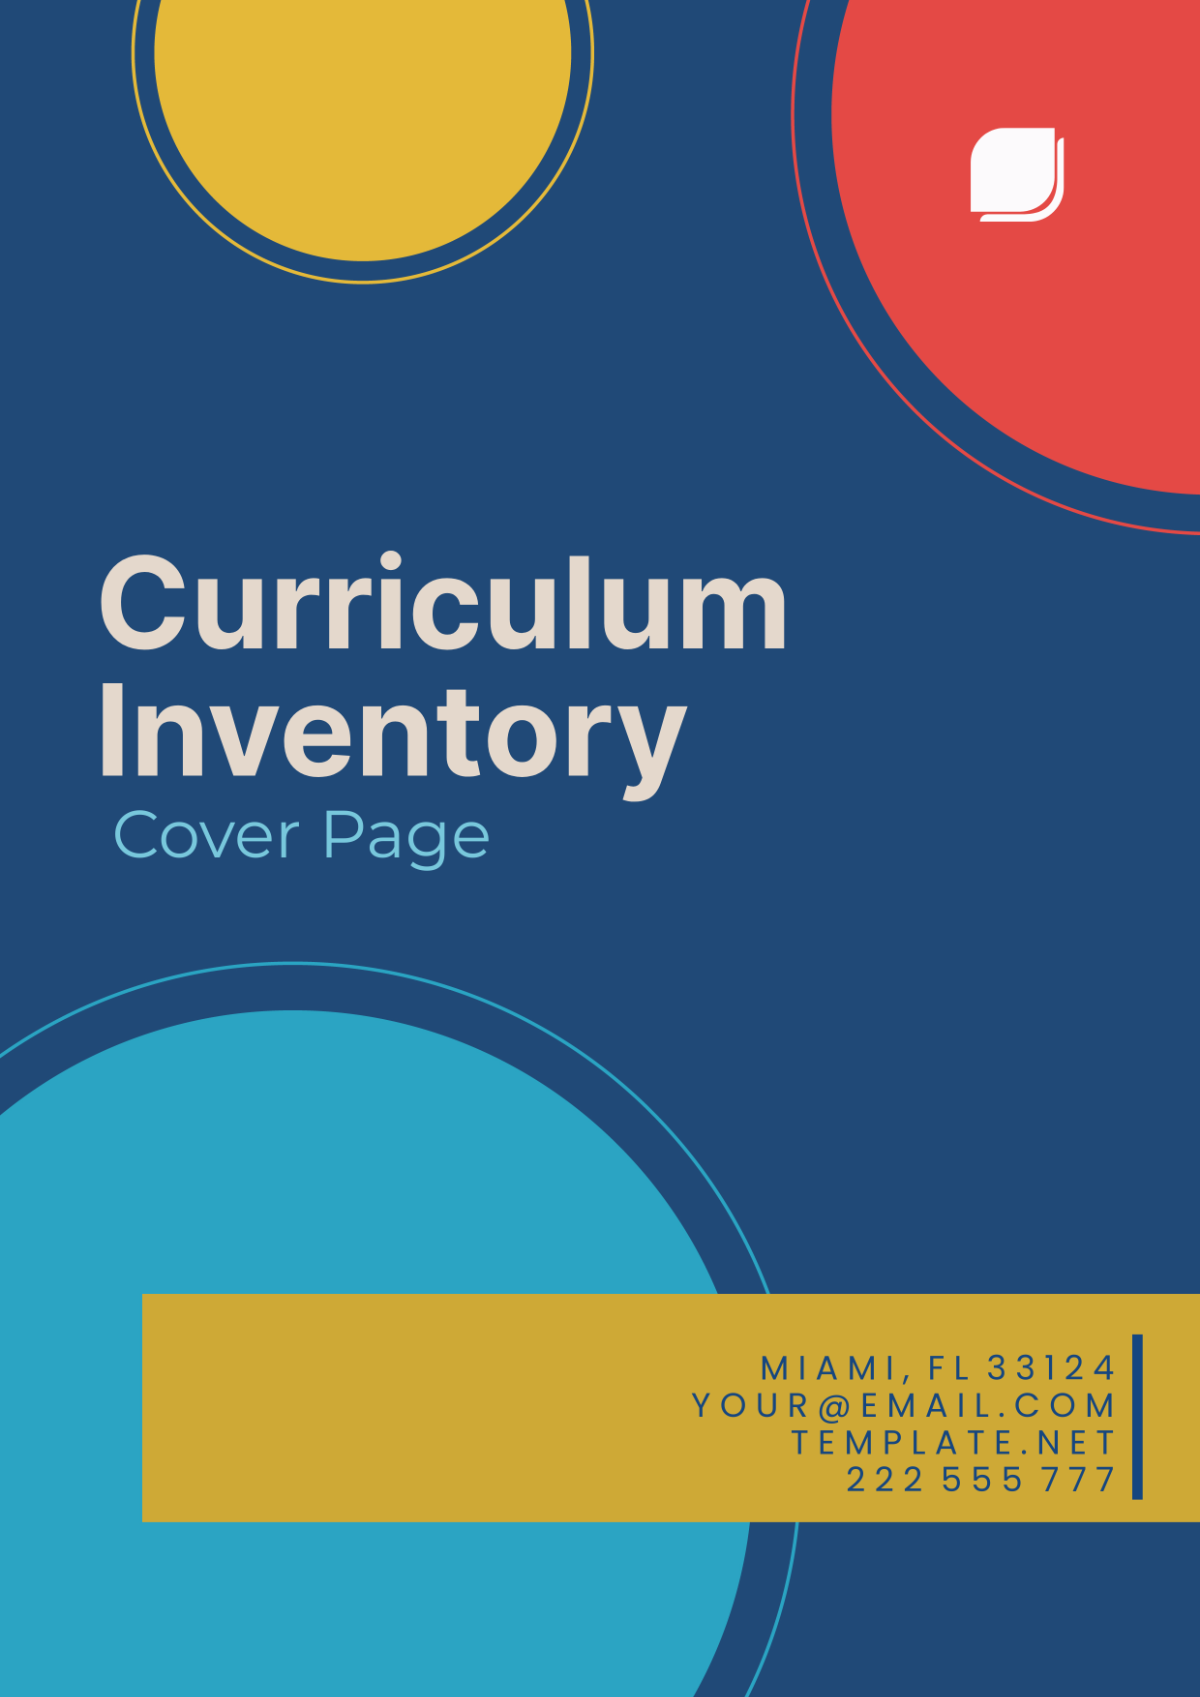 Curriculum Inventory Cover Page Template